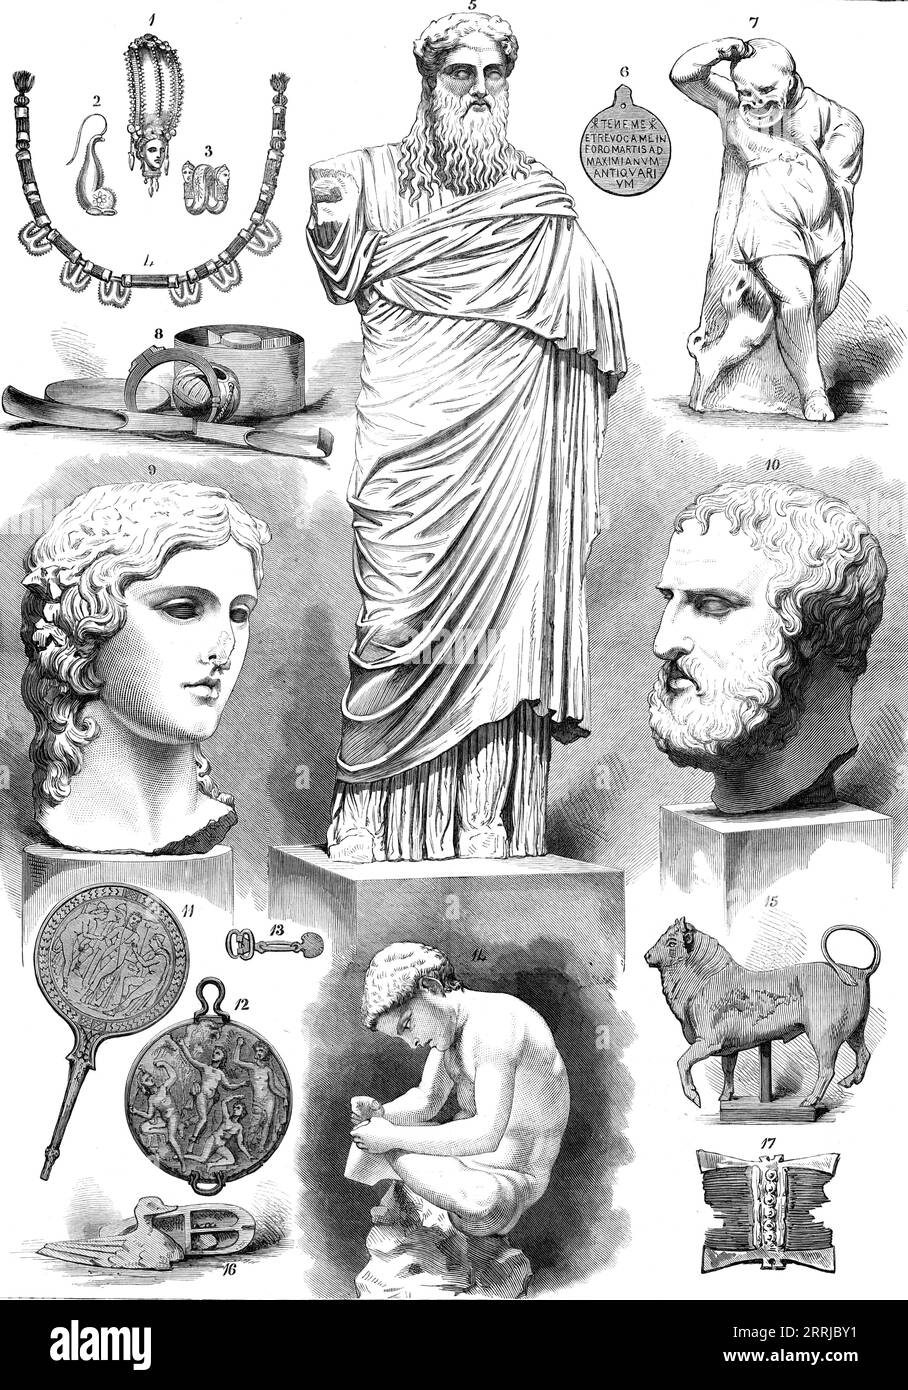 The Castellani Collection in the British Museum, 1876. '1. Gold earring...From Metapontum, in Magna Graecia. 2. Gold earring in form of dolphin...3. Gold spiral ornament, perhaps for twining tresses of hair through it...4. Etruscan necklace: the cylinders are composed of amber...5. Marble statue of heroic size, representing the Indian Bacchus...6. Bronze bulla, worn by slave. 7. Terracotta statuette of a comic actor. 8. Articles of toilet, consisting of strigils, or skin-combs, bottle for oil, and box with compartments. 9. Marble head of young Bacchus, or perhaps Ariadne...10. Marble head of E Stock Photo